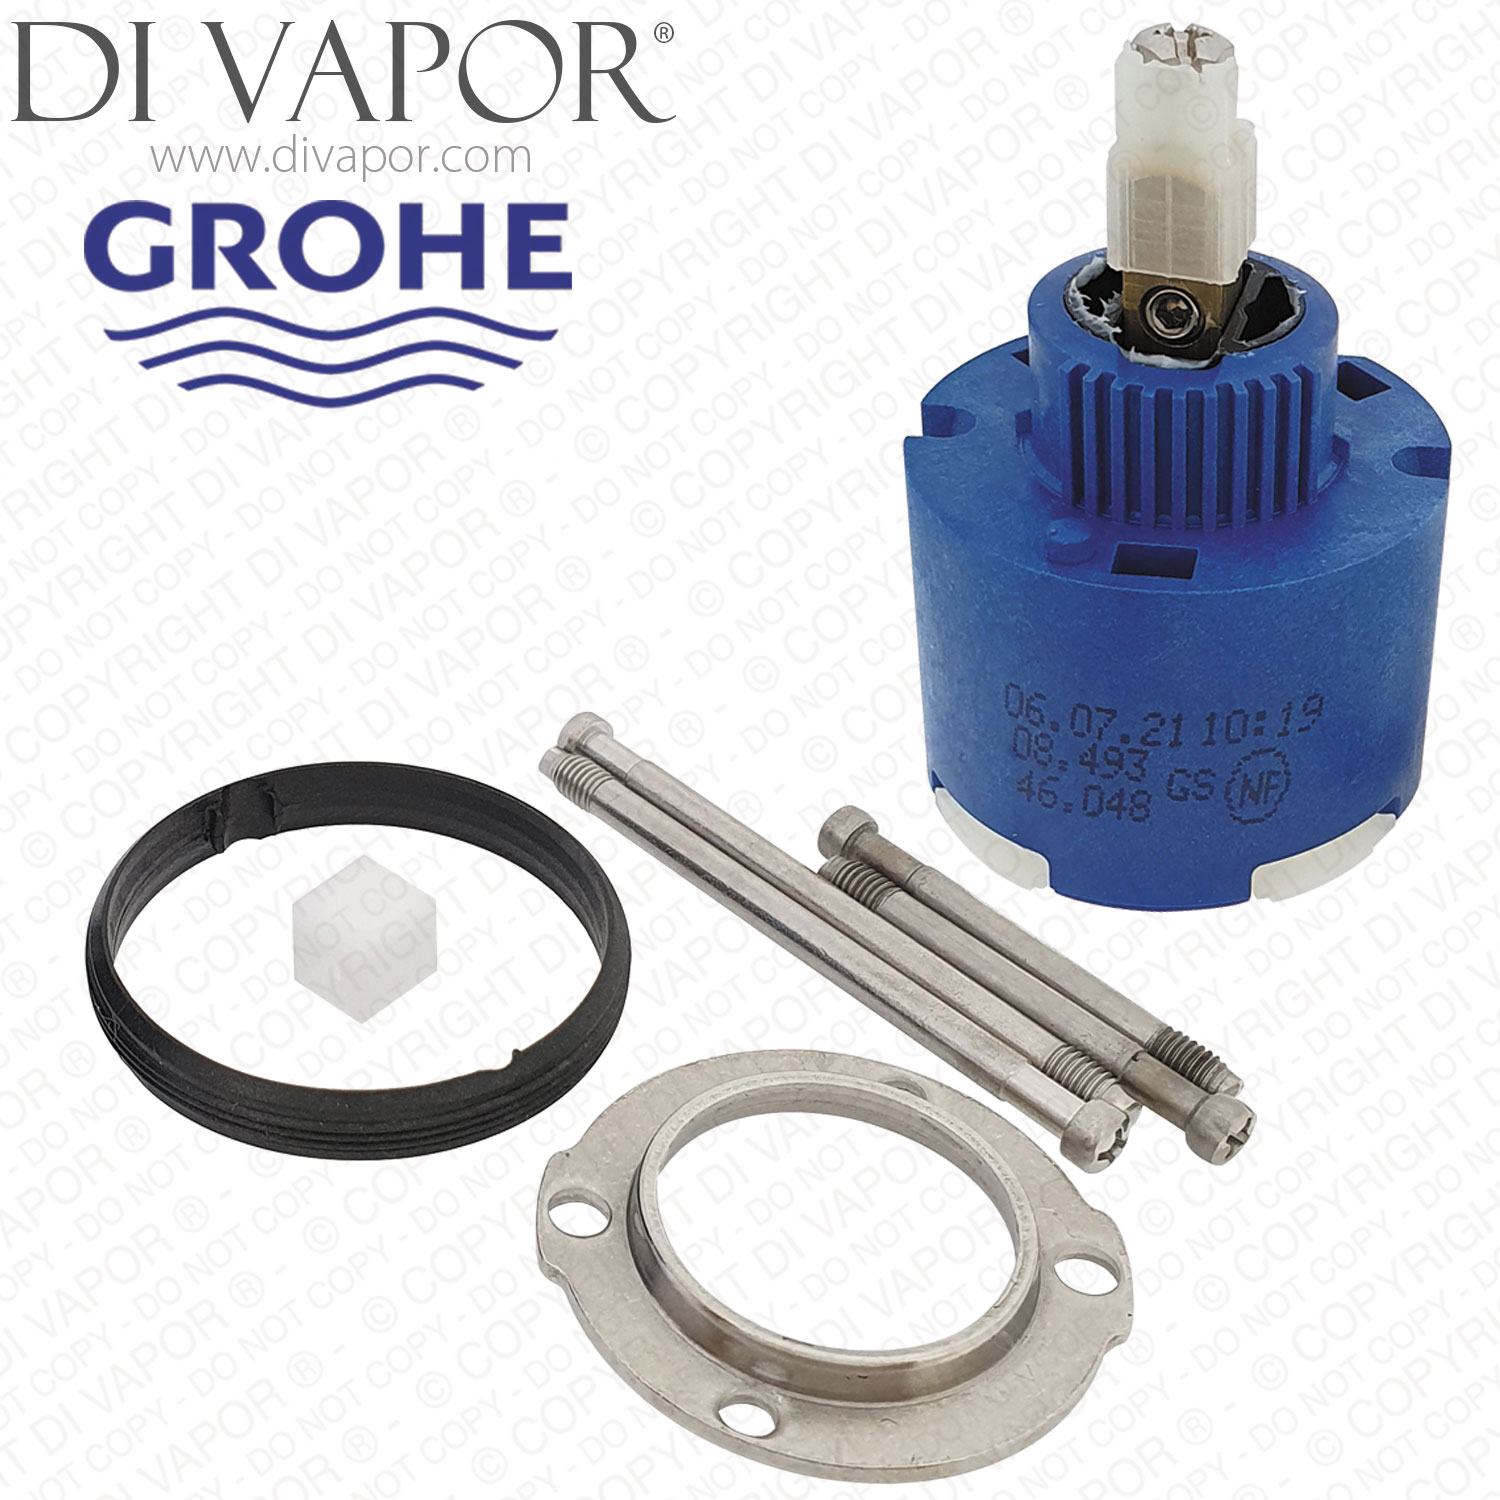 GROHE cartouche GROHE 46048000 cartouche 46048 pour mitigeur GROHE  4005176008283